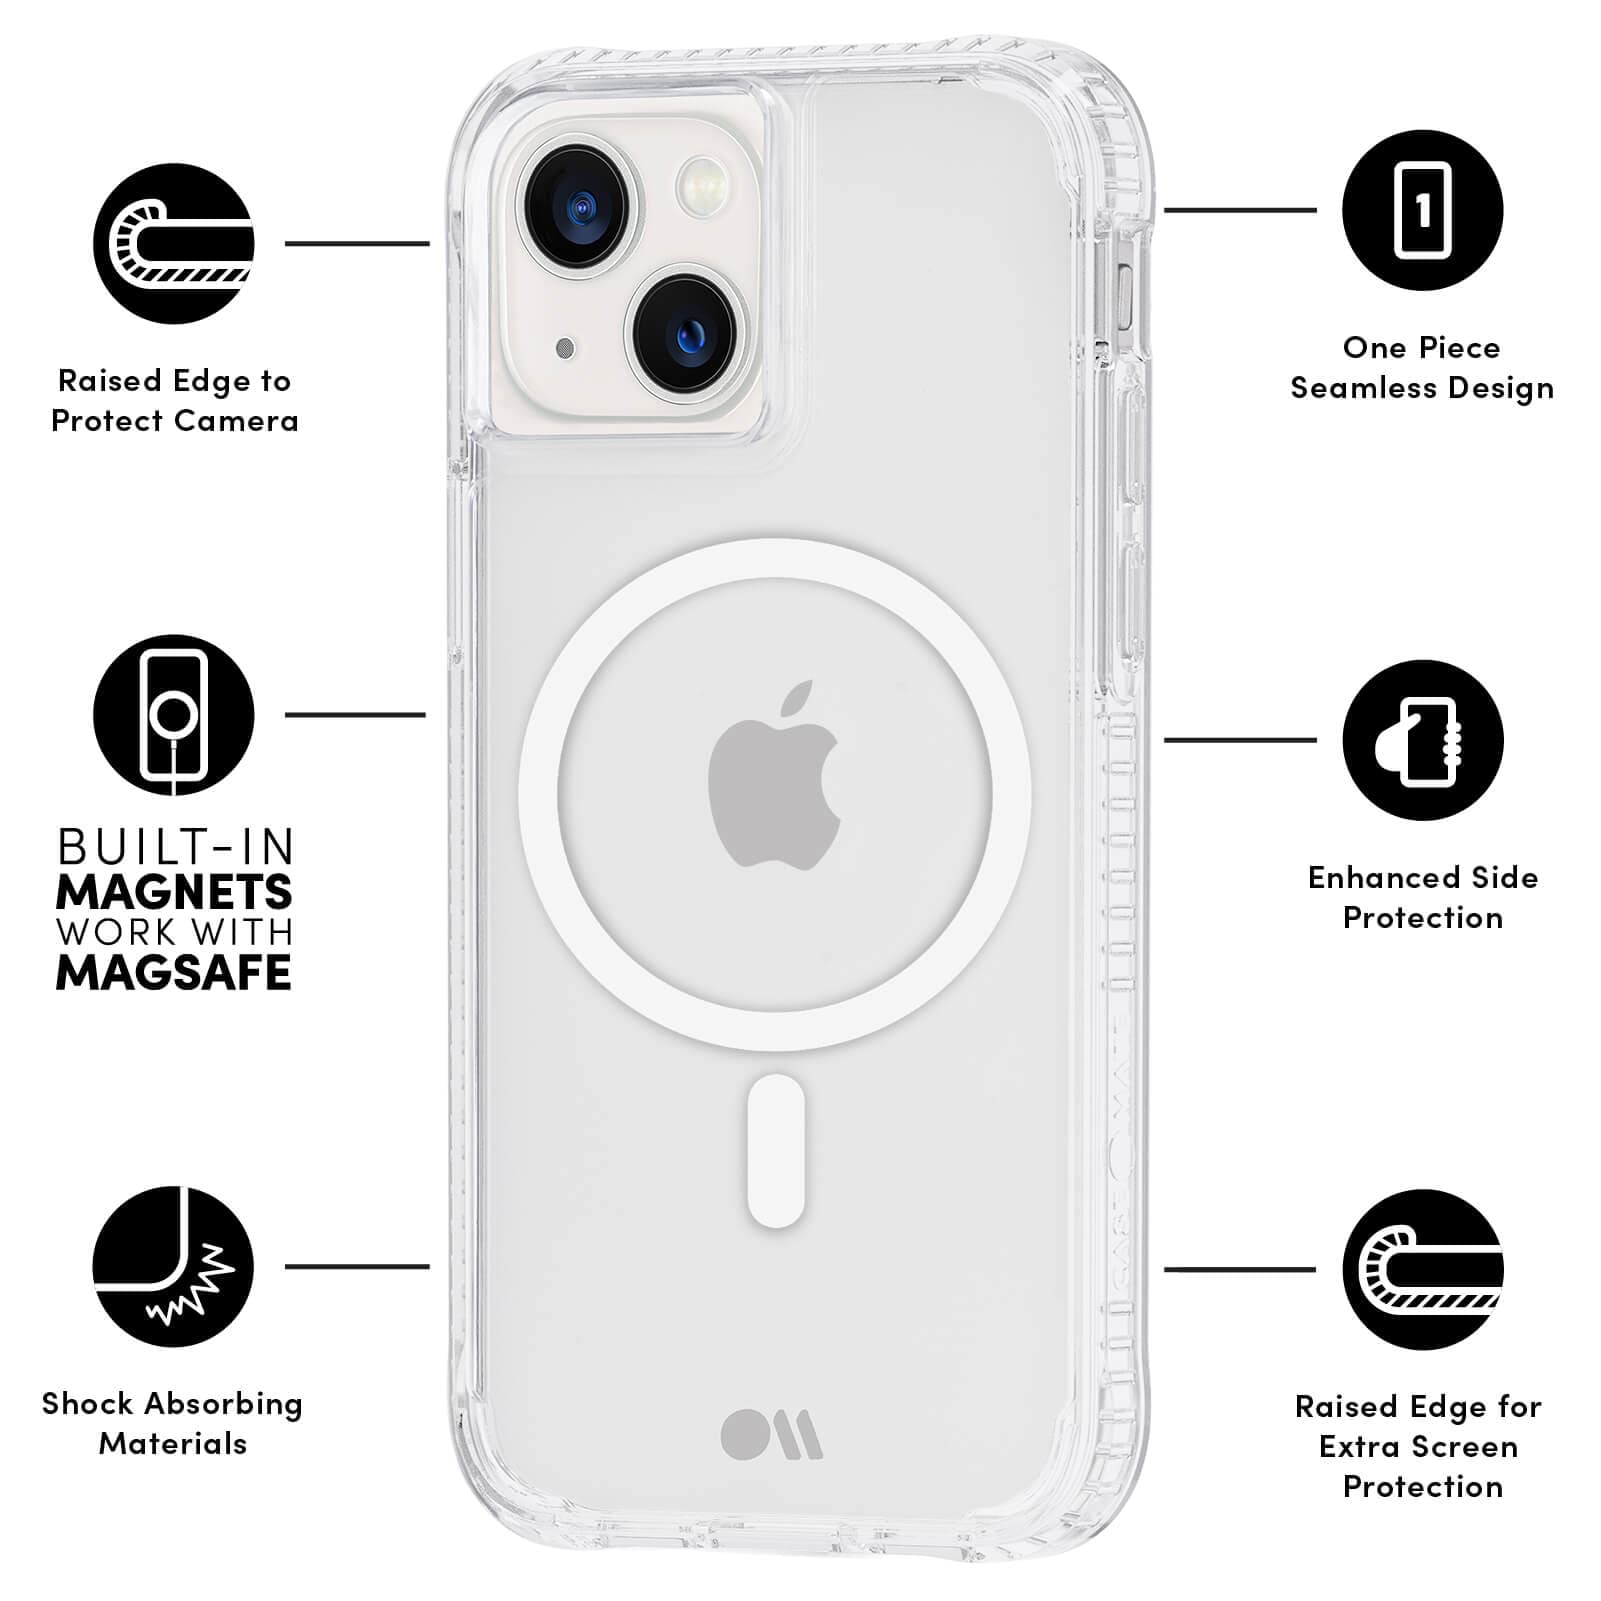 FEATURES: RAISED EDGE TO PROTECT CAMERA, BUILT IN MAGNETS WORK WITH MAGSAFE, SHOCK ABSORBING MATERIALS, ONE PIECE SEAMLESS DESIGN, ENHANCED SIDE PROTECTION, RAISED EDGE FOR EXTRA SCREEN PROTECTION. COLOR::CLEAR